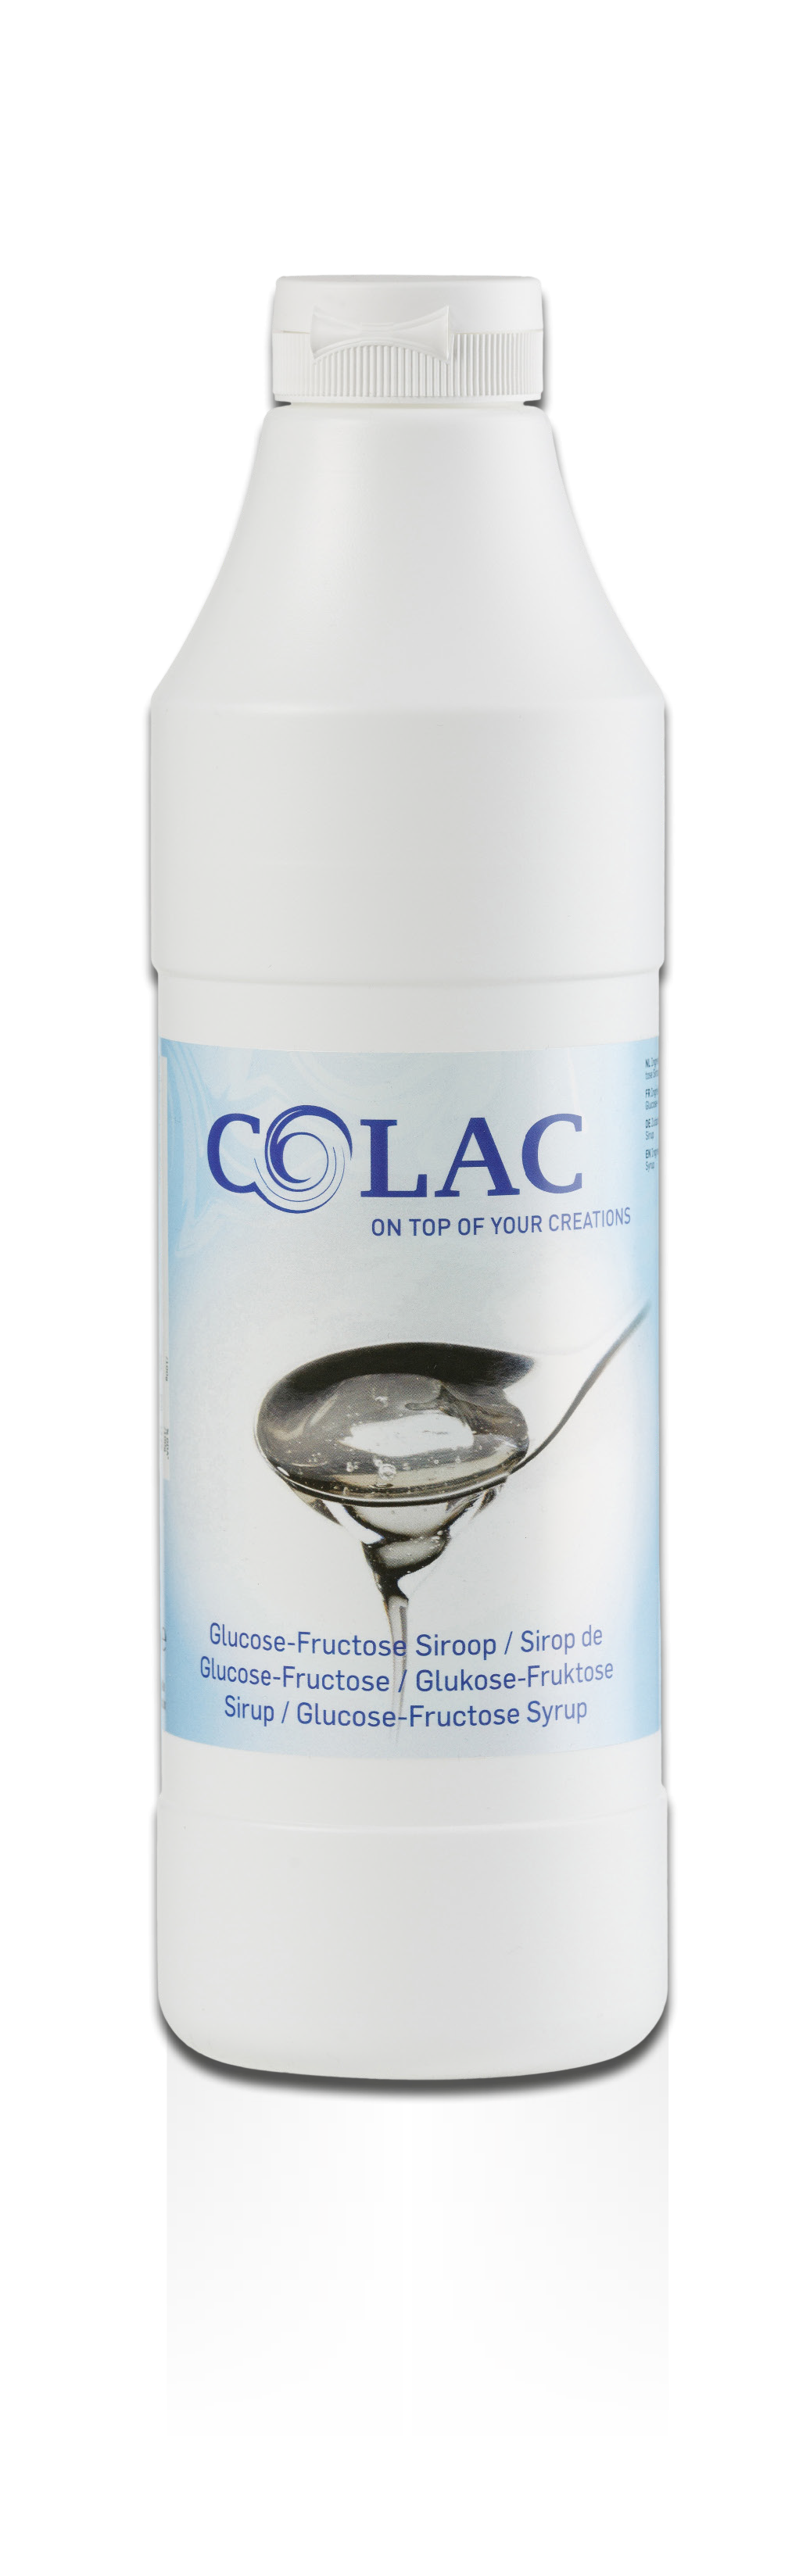 Colac Glucose Fructose Siroop 1kg Knijpfles